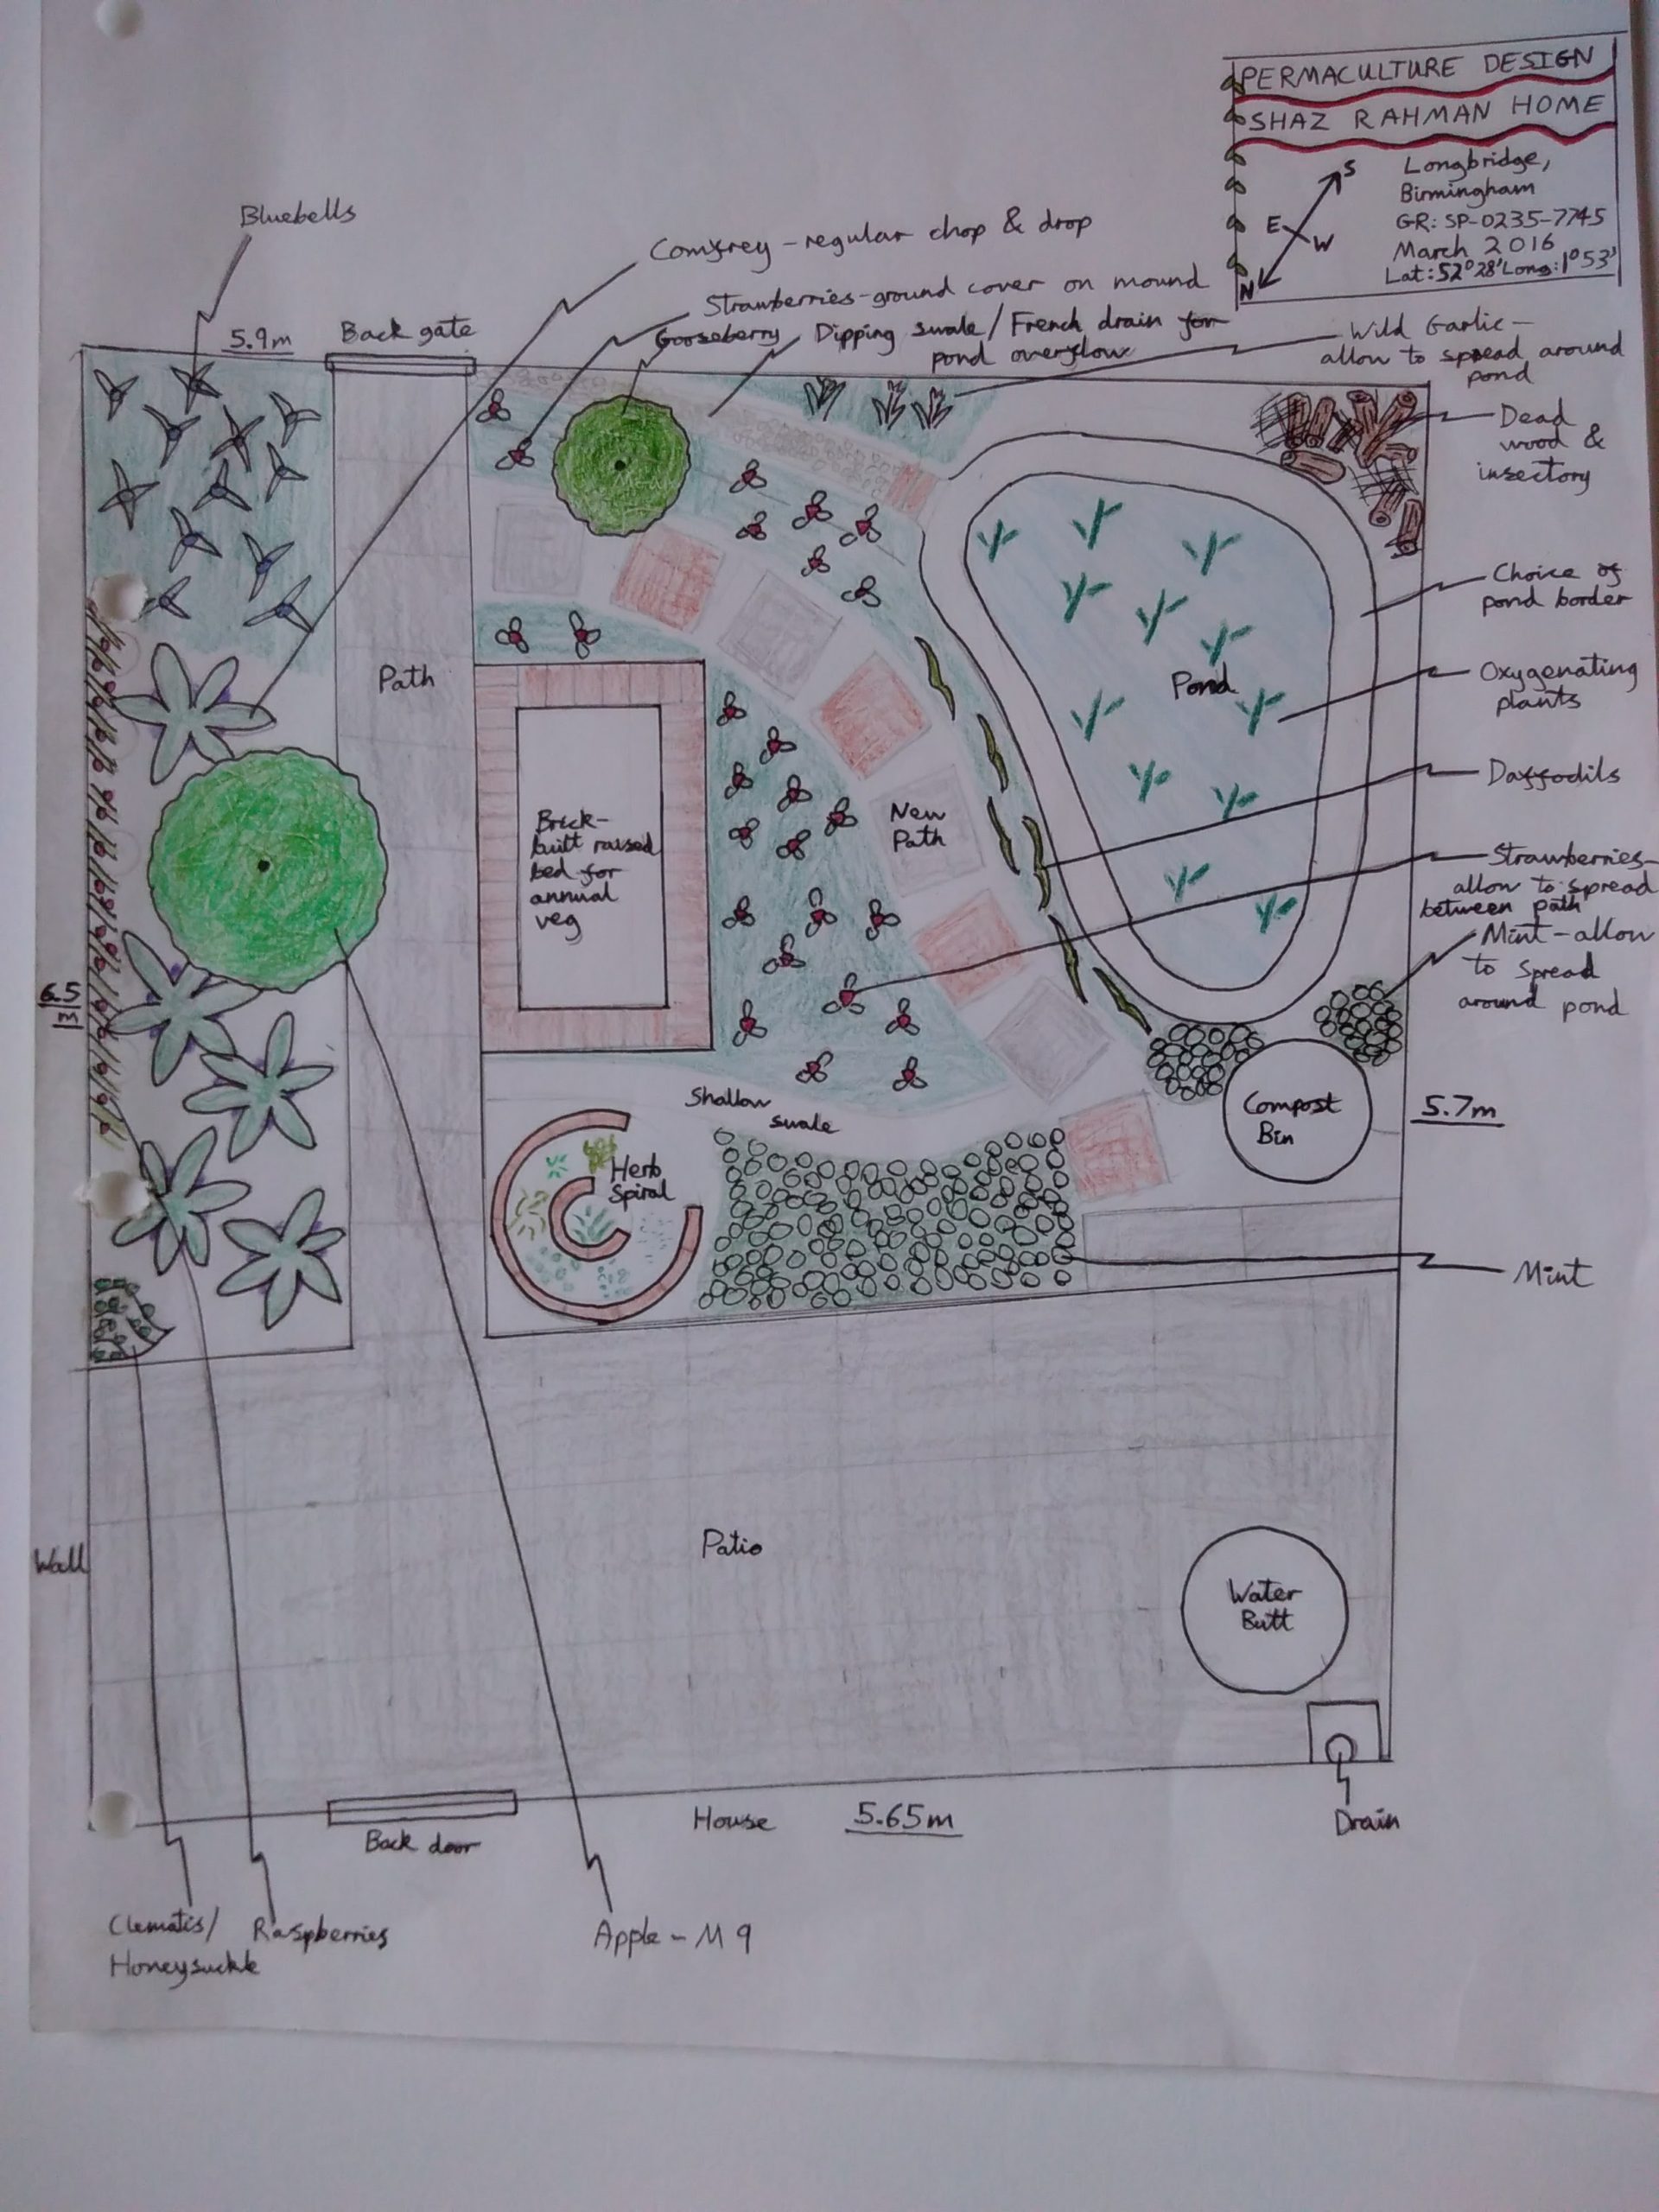 Permaculture Plan